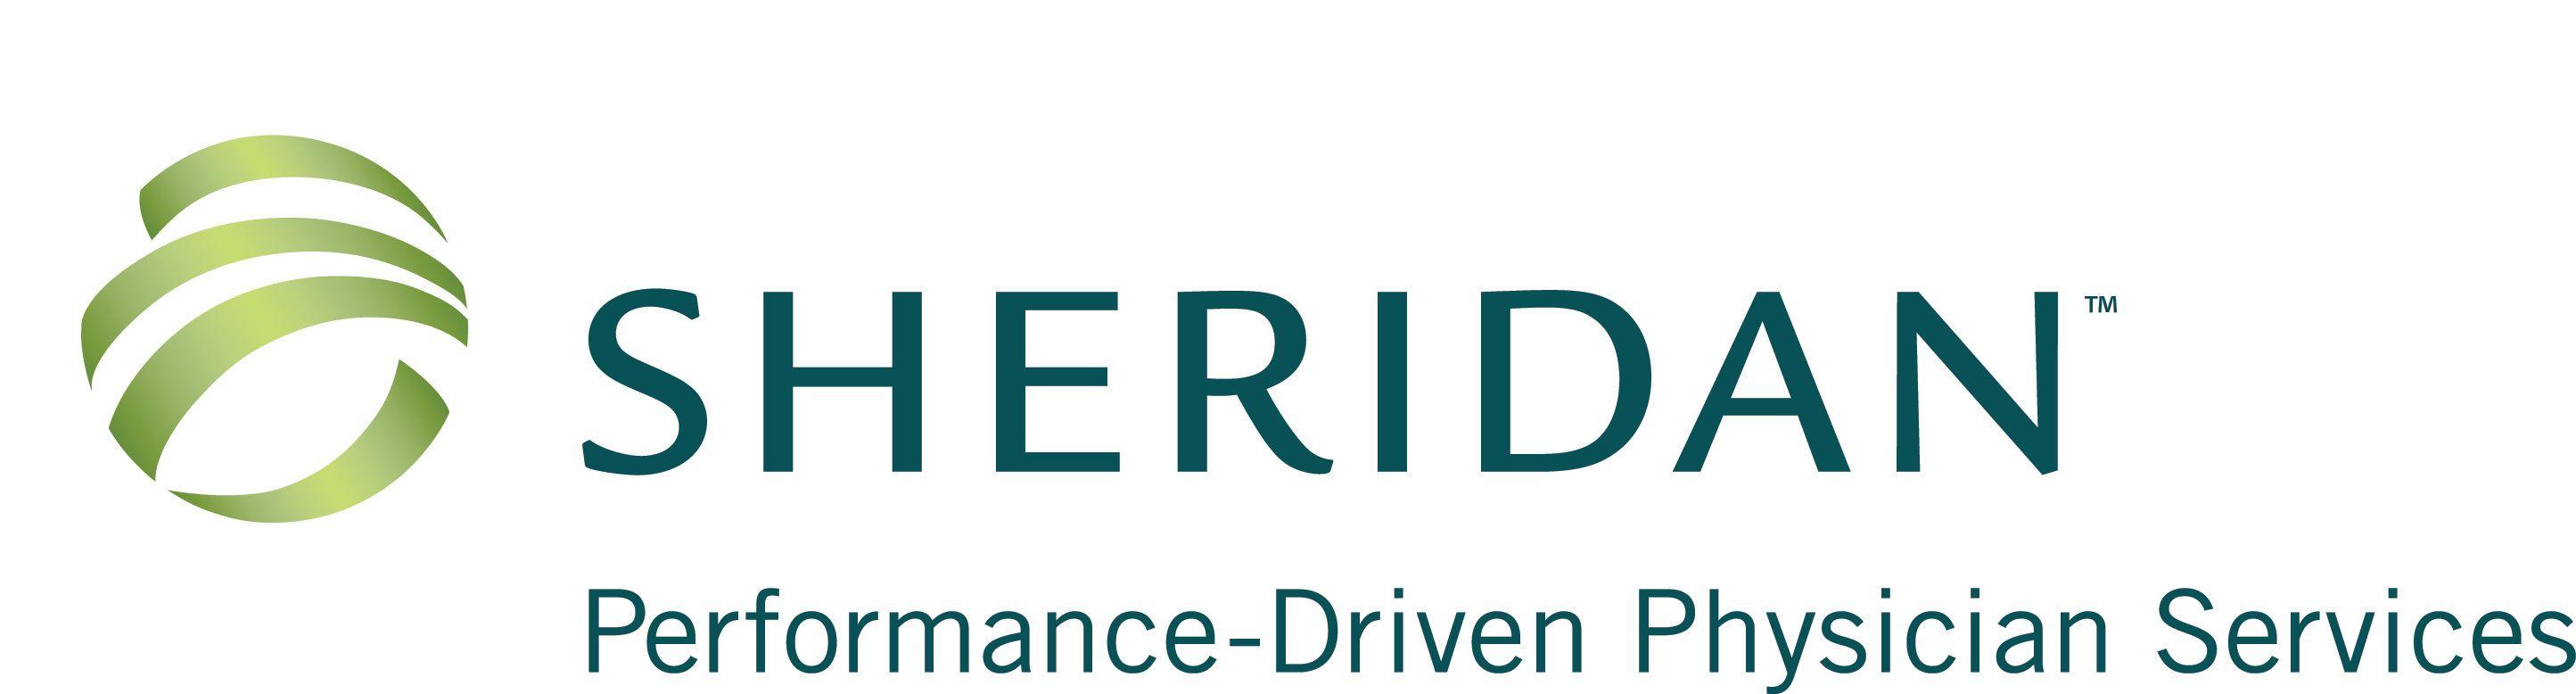 The Sheridan Logo - AMSURG Corp. to Acquire Sheridan Healthcare in Transformational